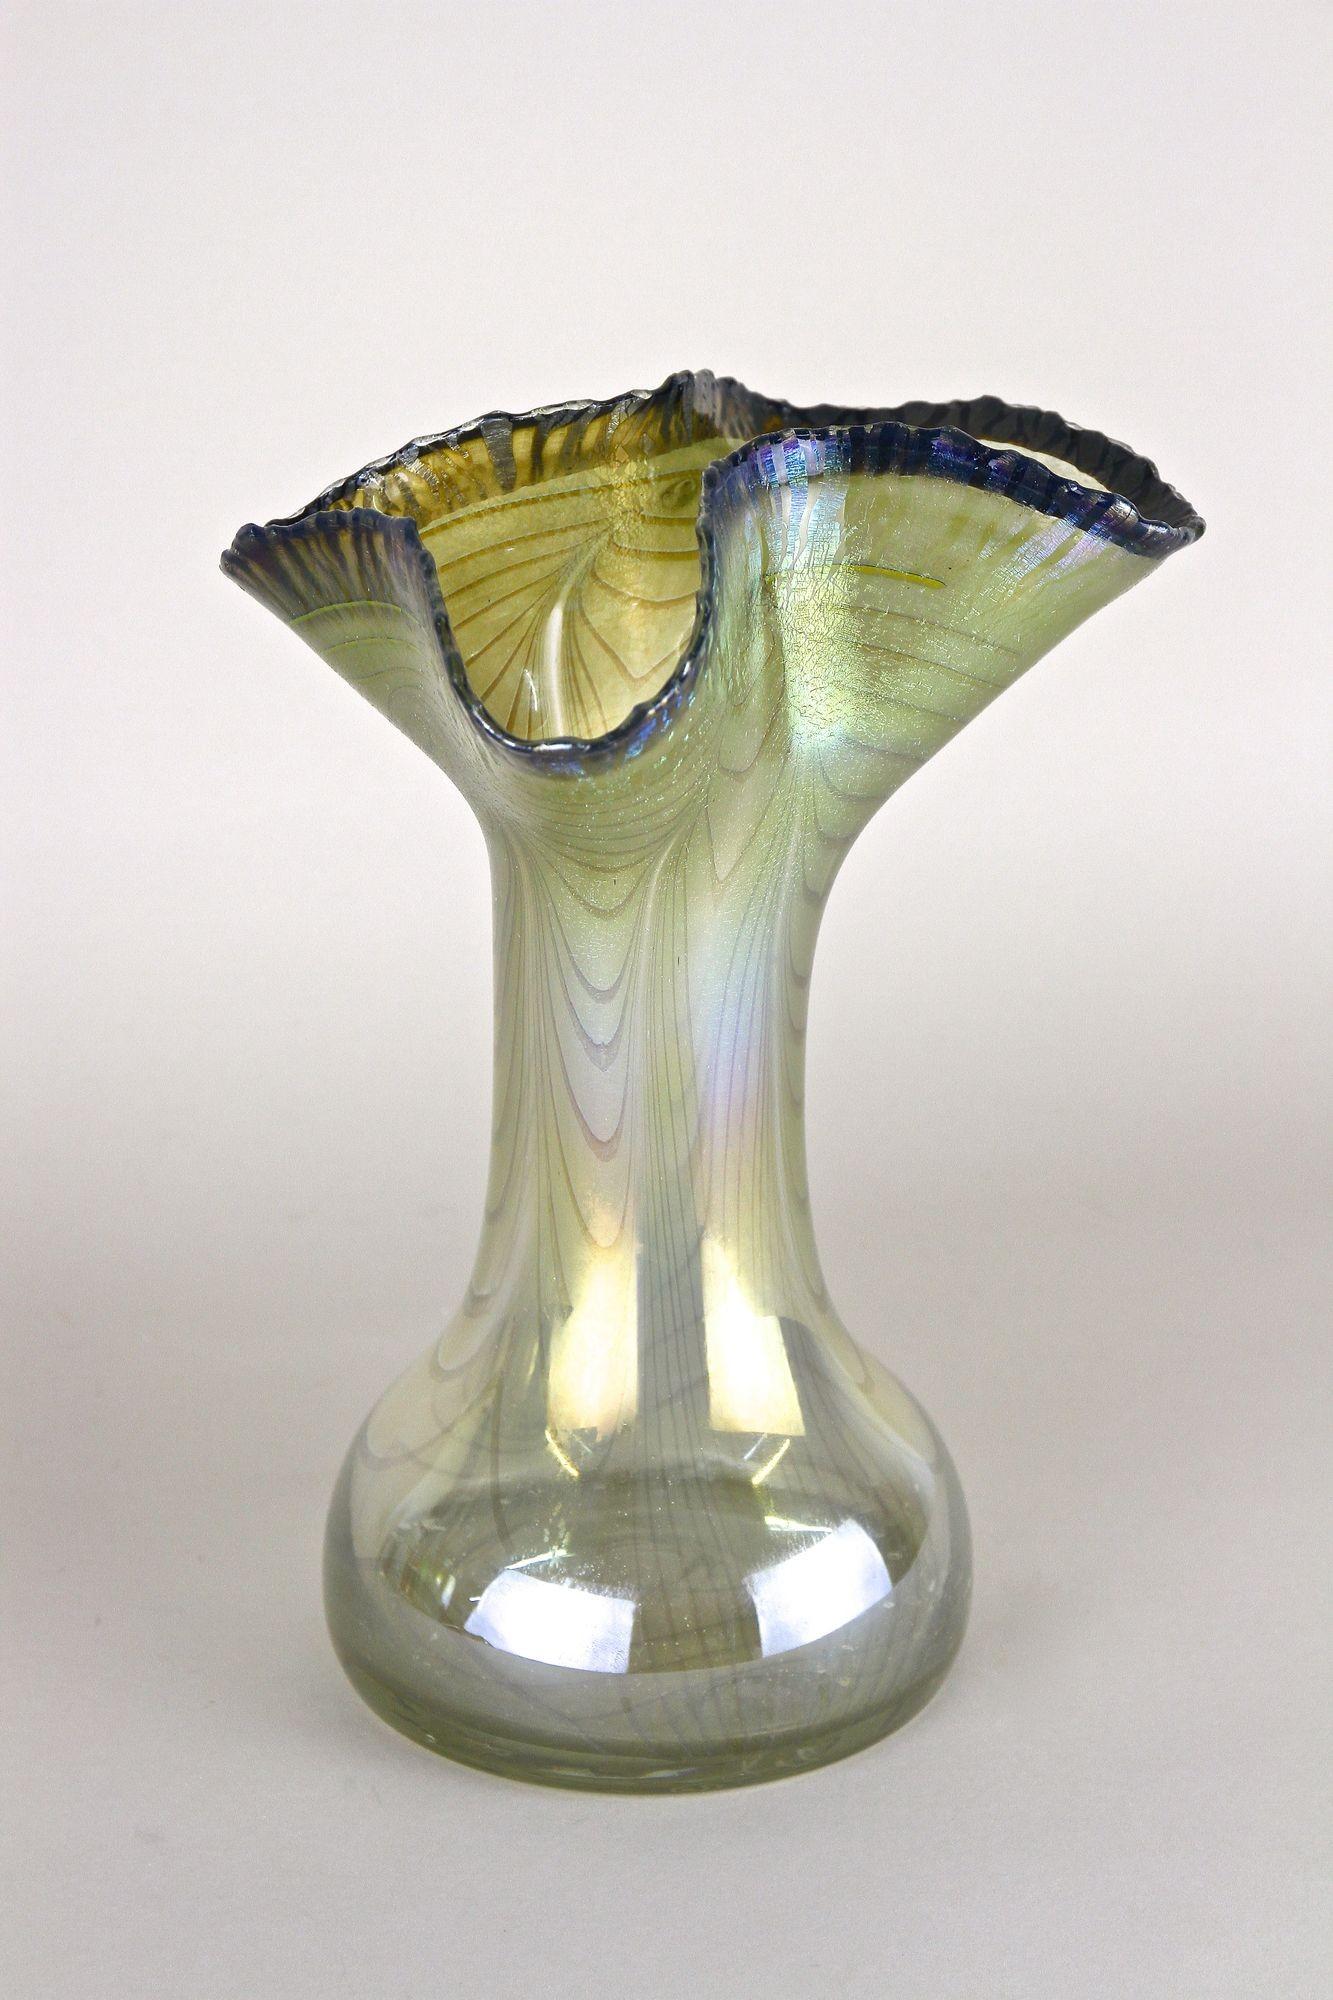 20th Century Iridescent Glass Vase by E. Eisch - Signed, Germany 1982 For Sale 9